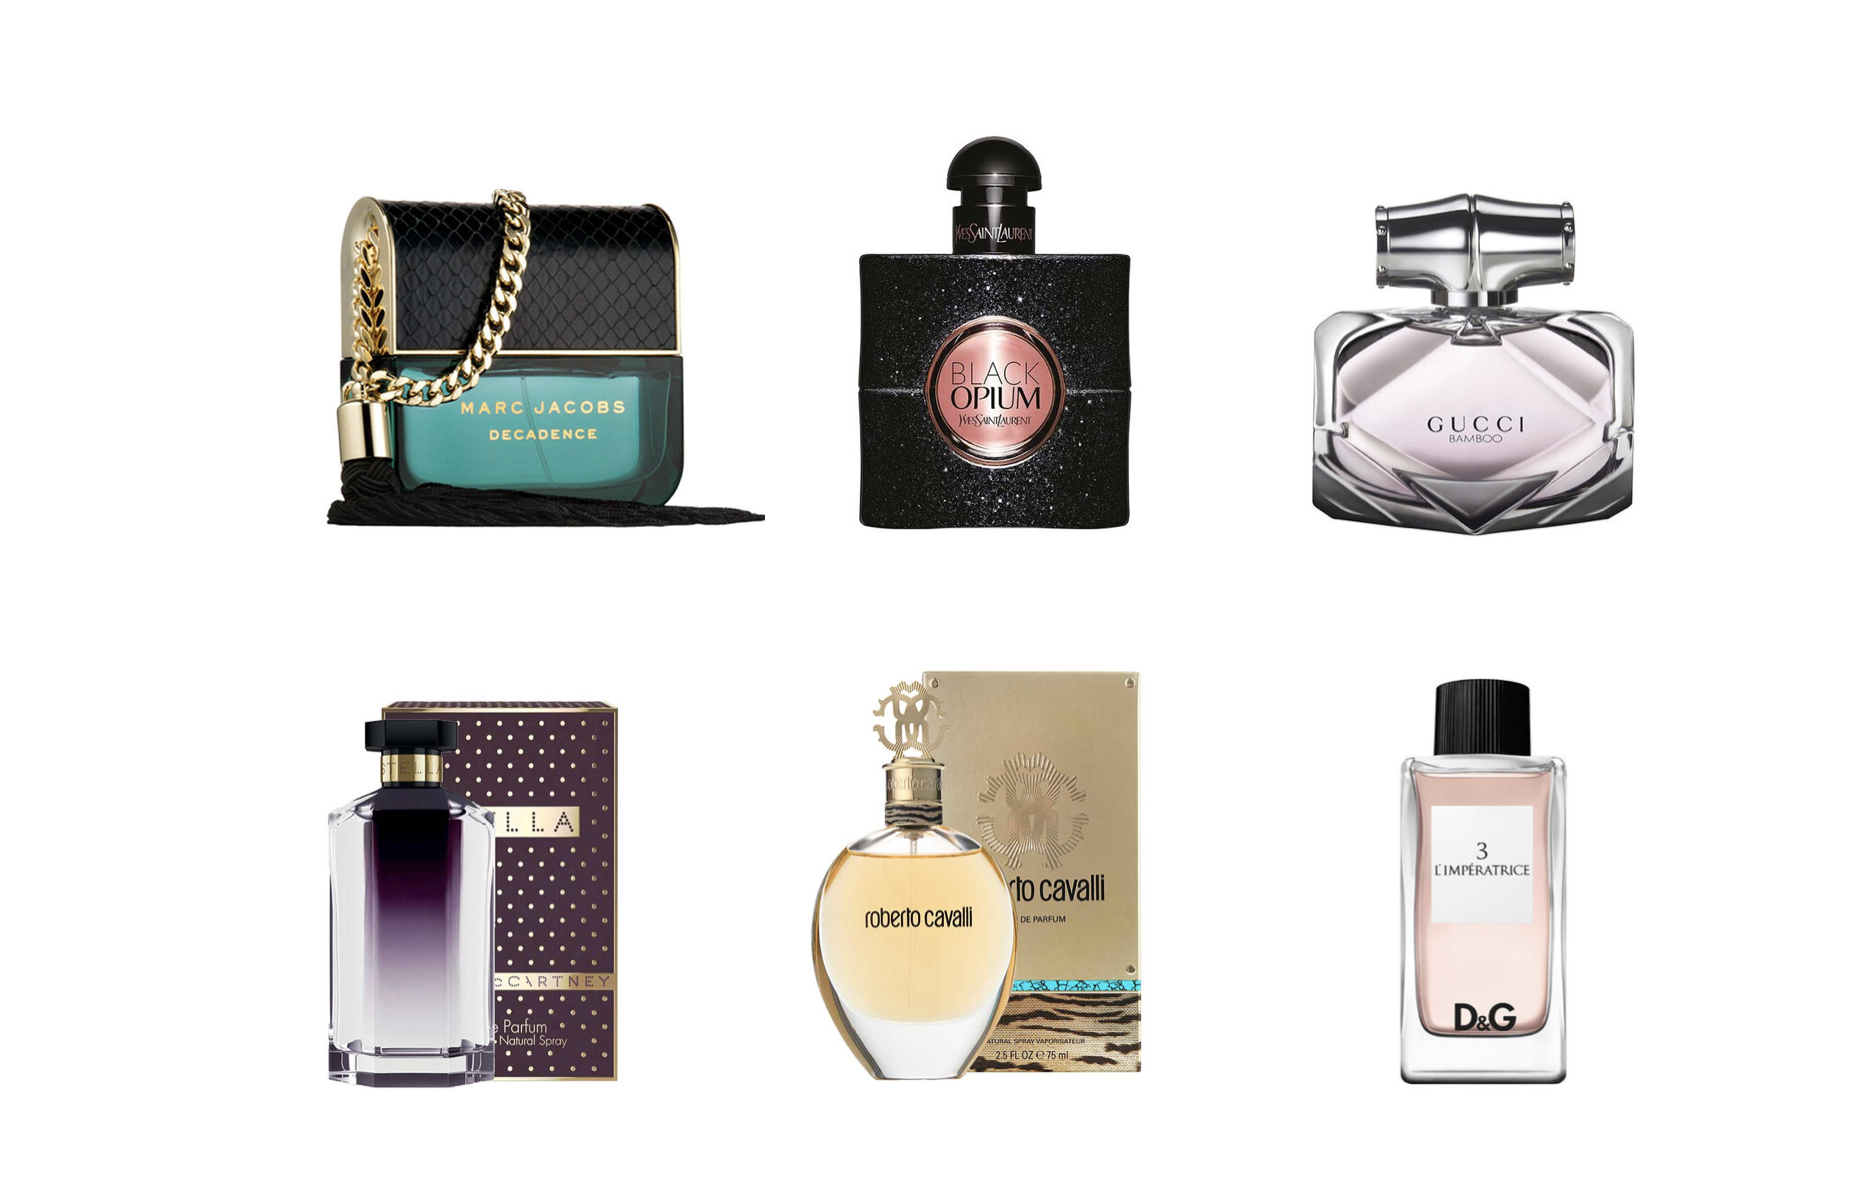 We Rank the 10 Most Popular Women's Fragrances of 2019